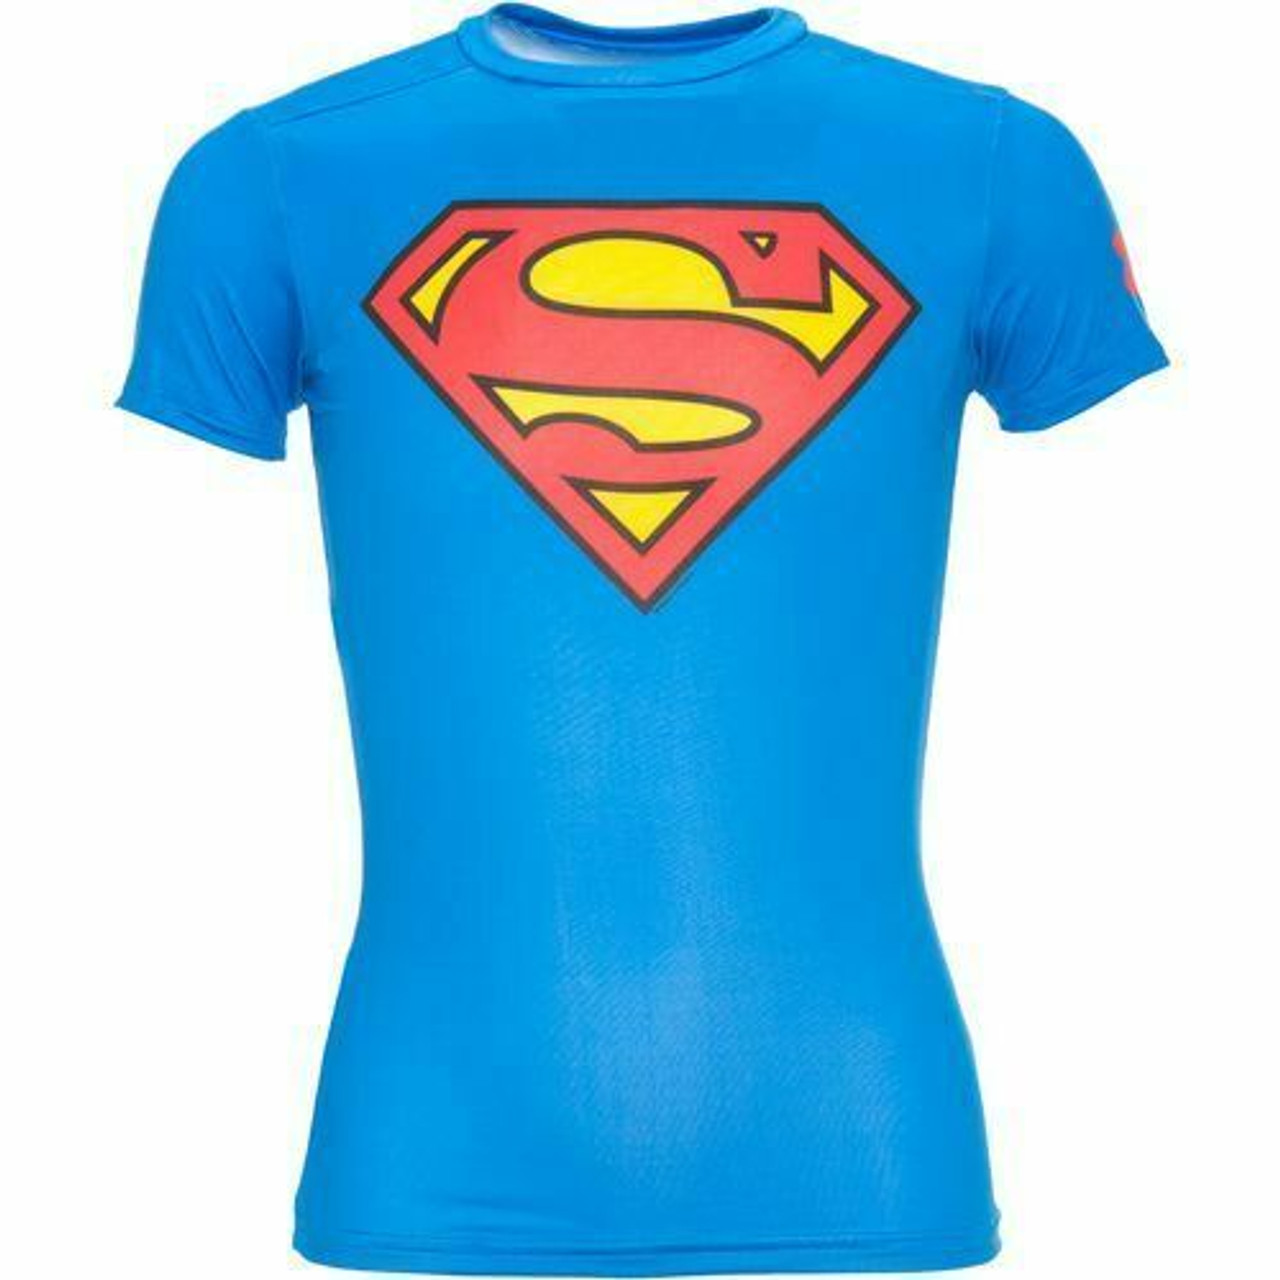 Superhero, Alter Ego Shirts From Under Armour - Lacrosse Playground